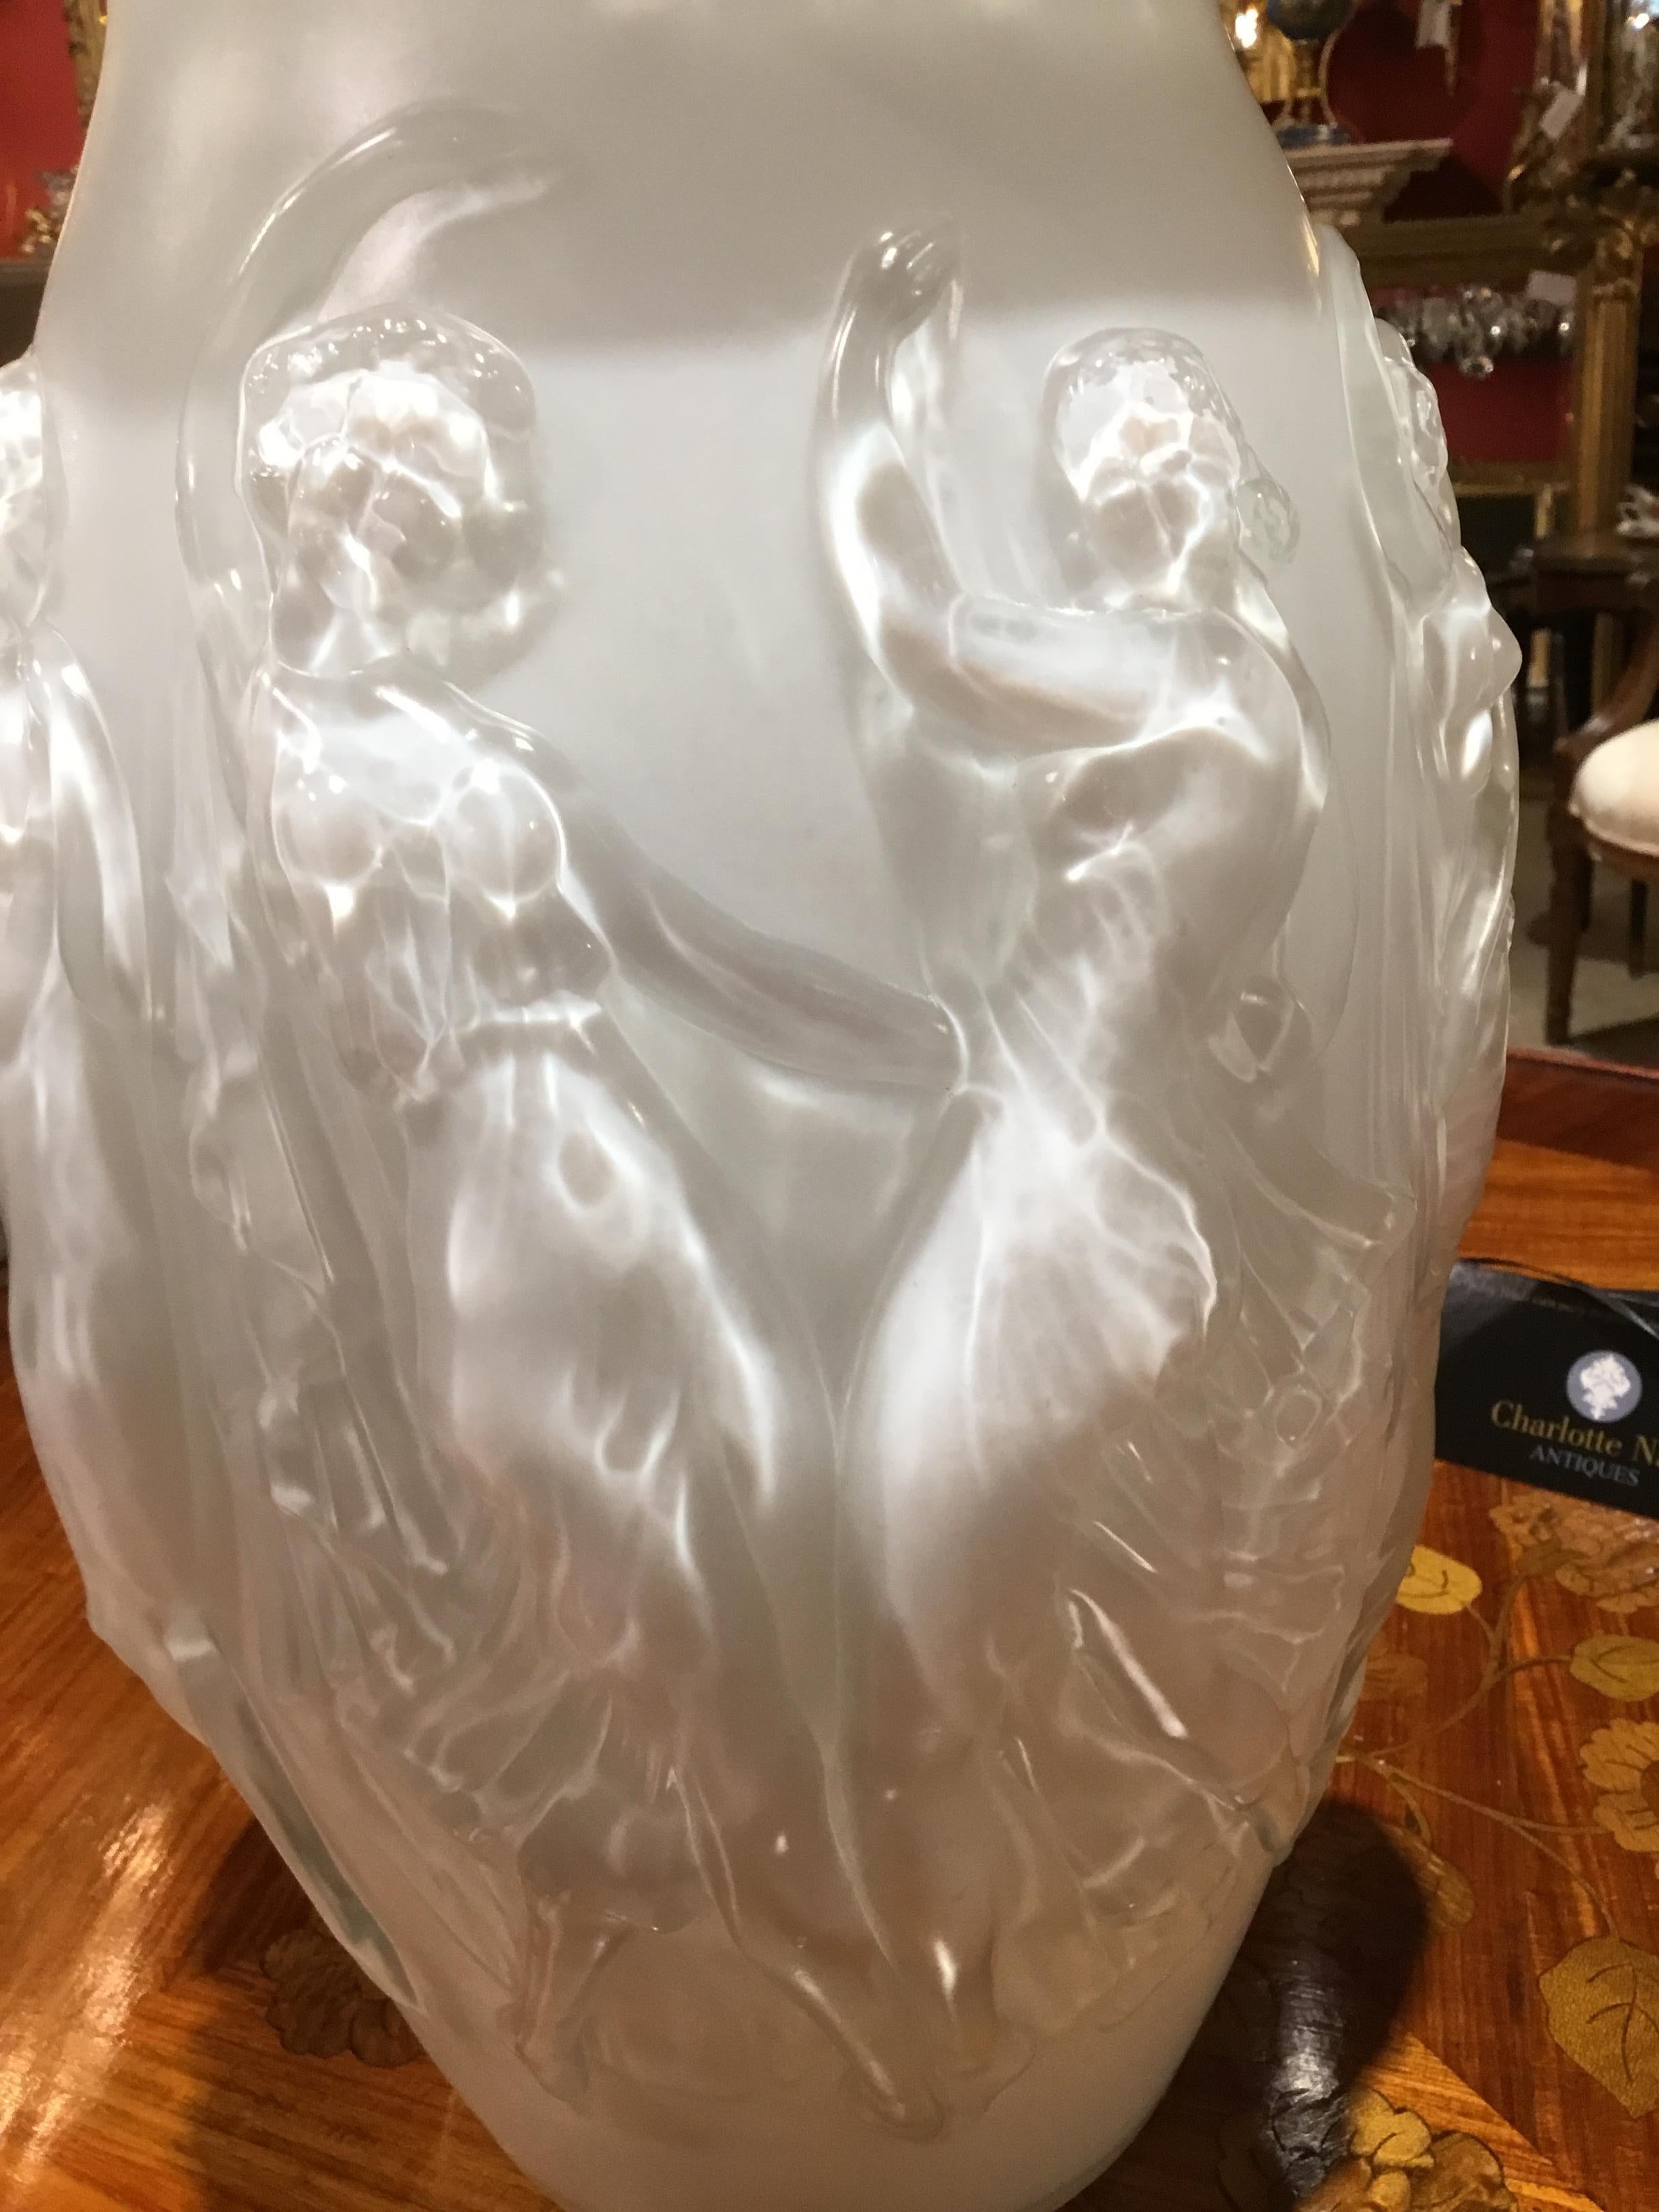 French Sabino/France Mouth Blown Vase “La Danse” in Translucent White Glass of Dancers